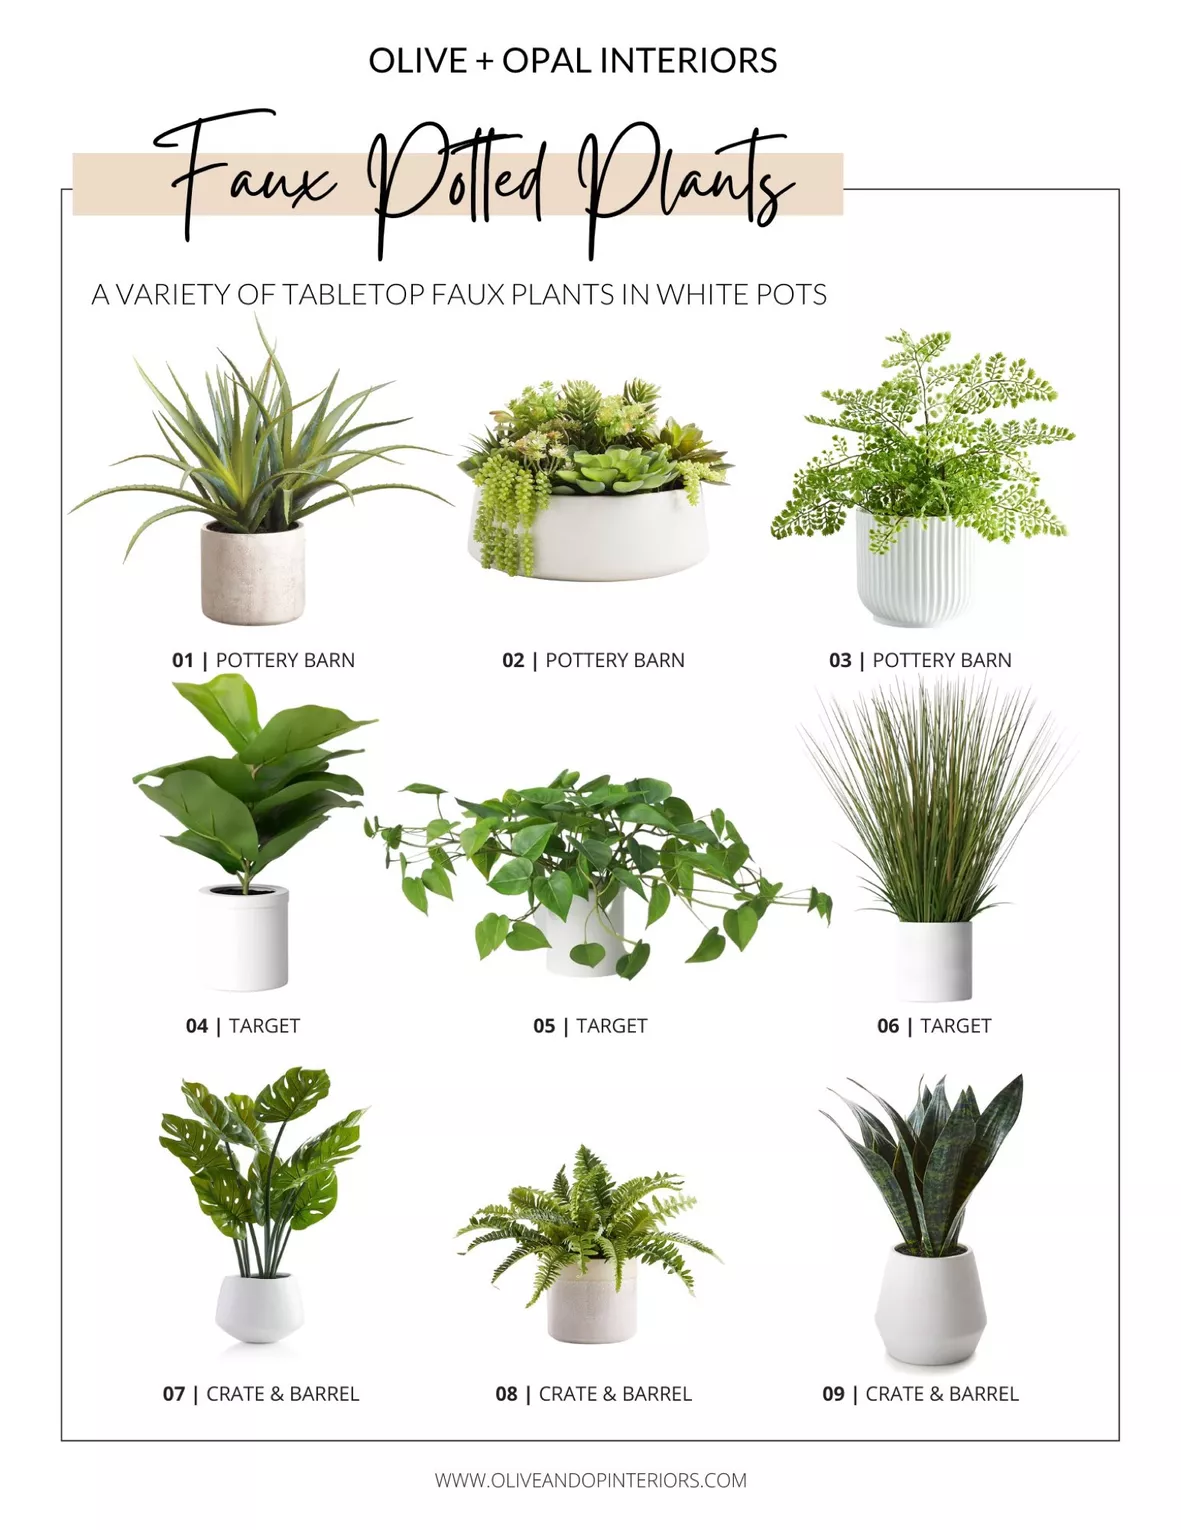 Fern : Fake Plants & Artificial Plants for Indoors : Target